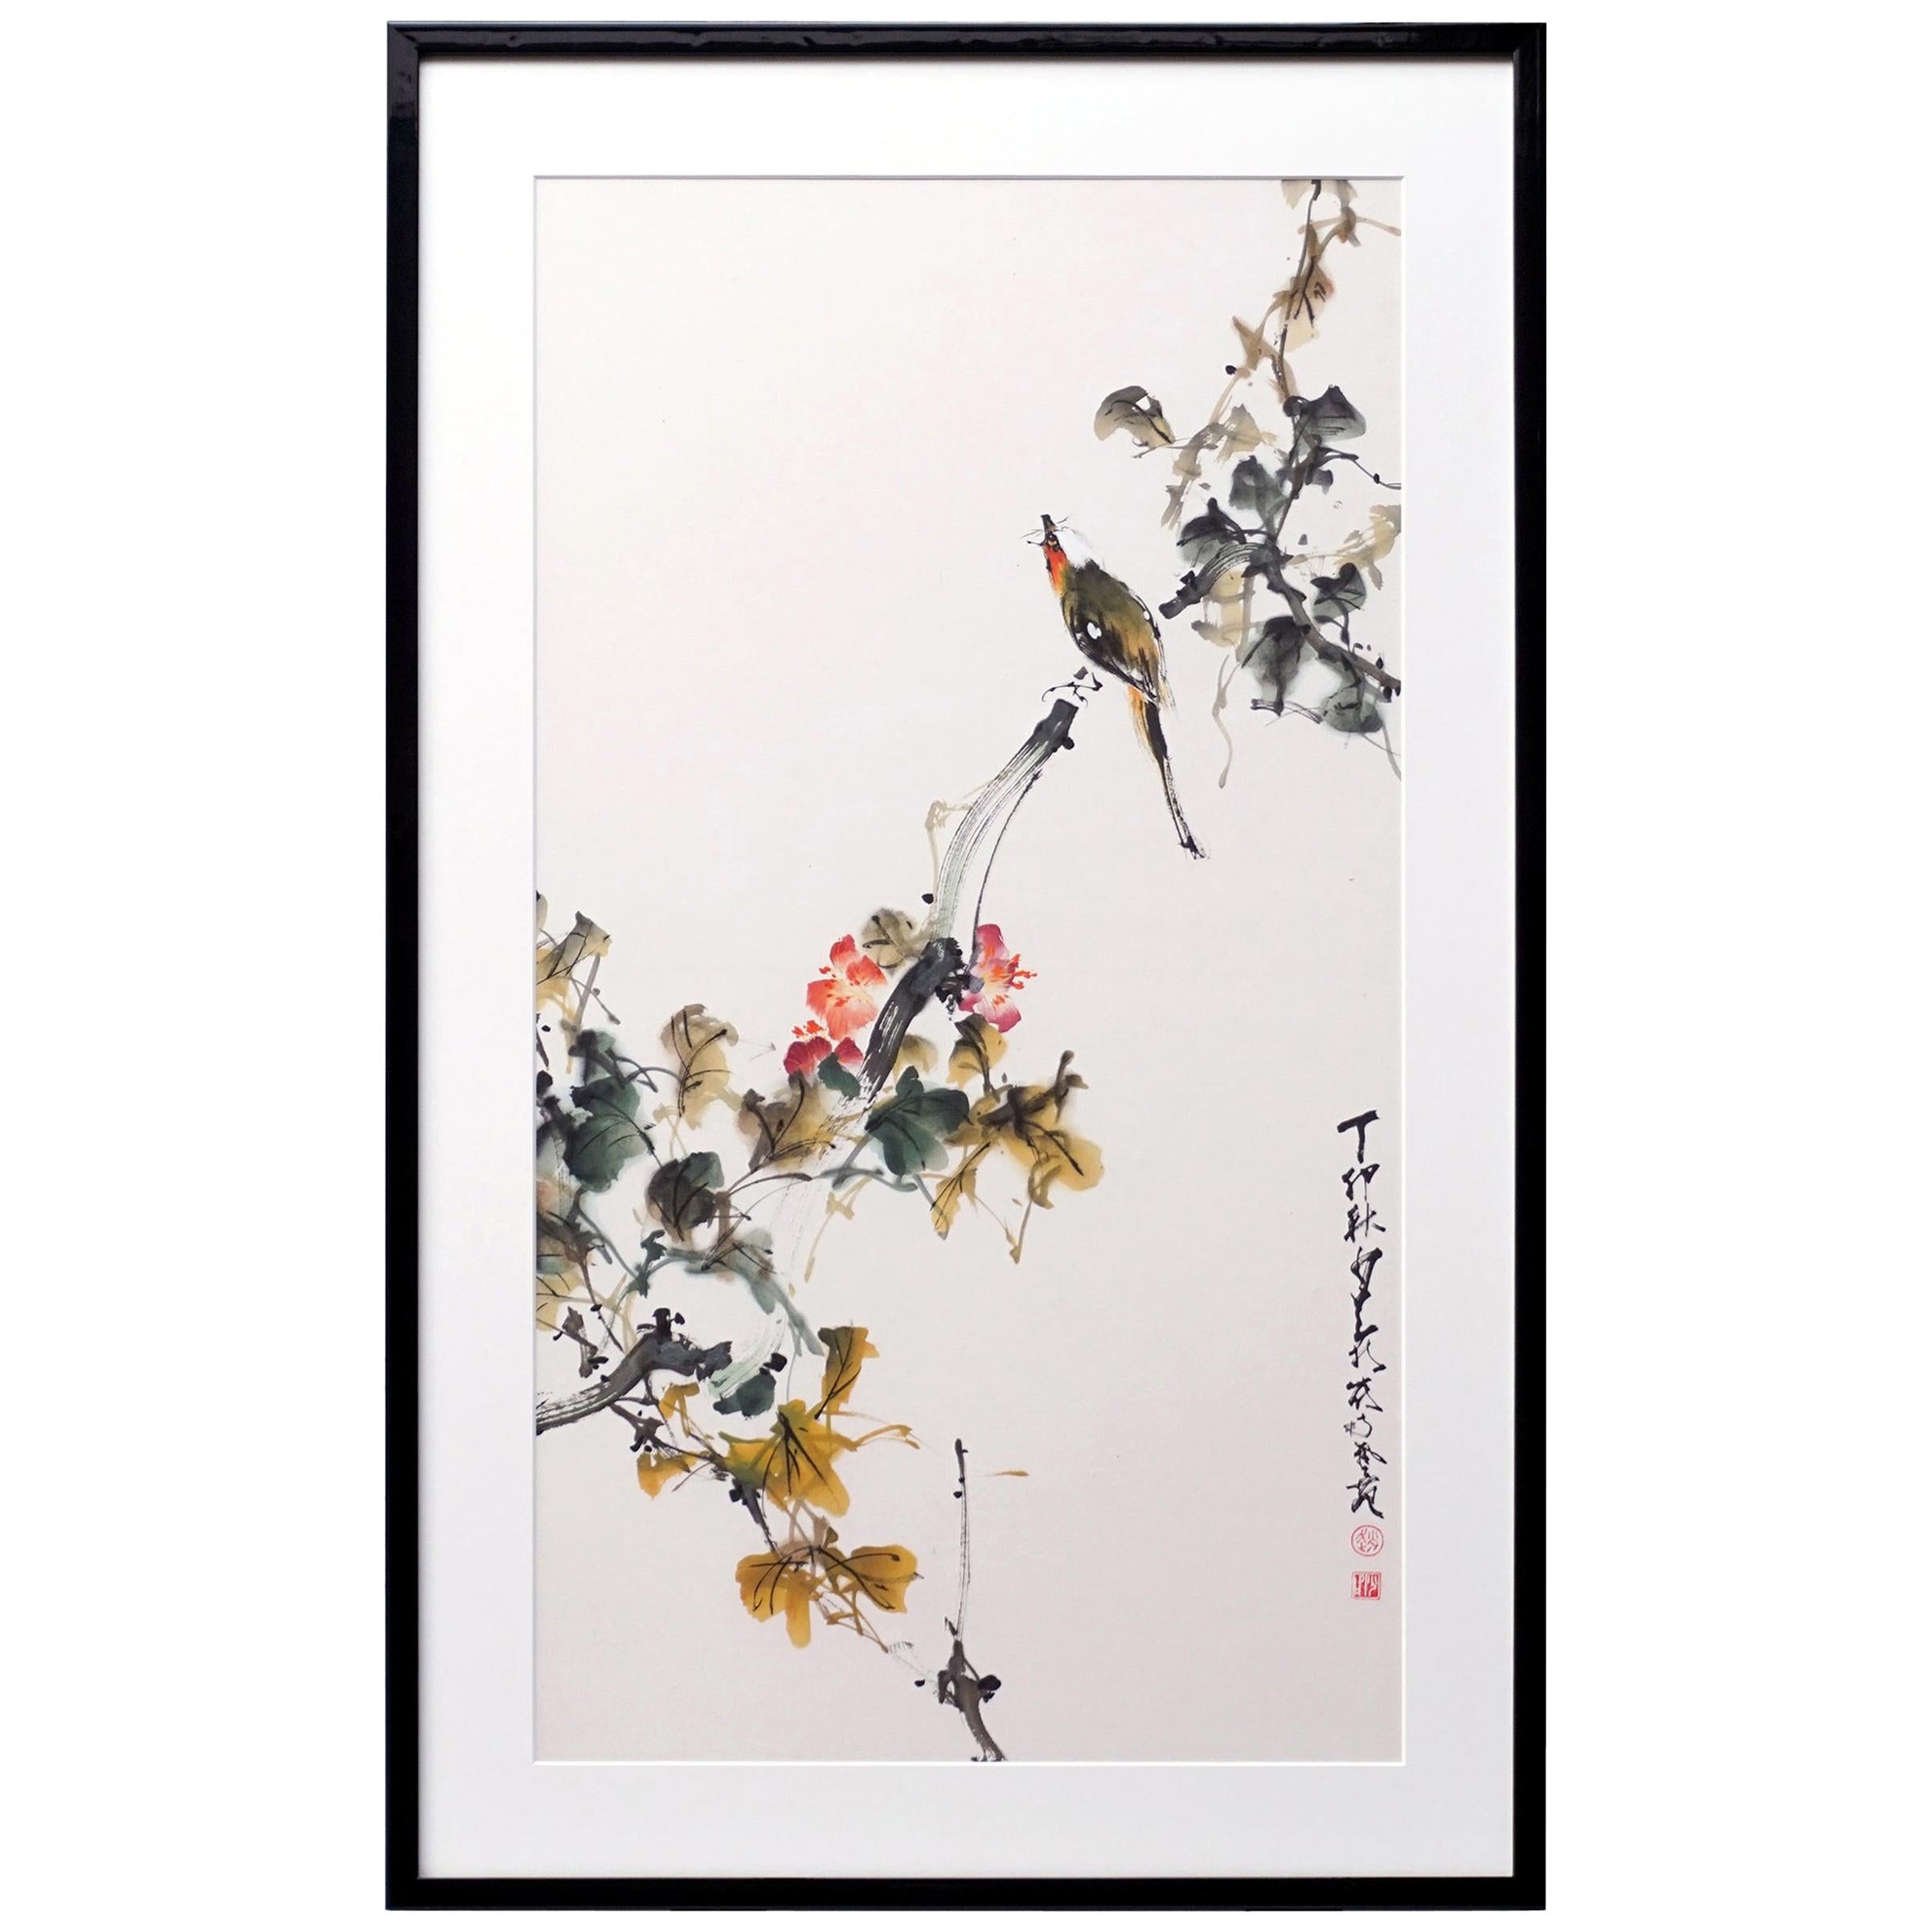 Framed Chinese Watercolor Painting 'Bird on Flower' by Zhao Shao Ang in 1987